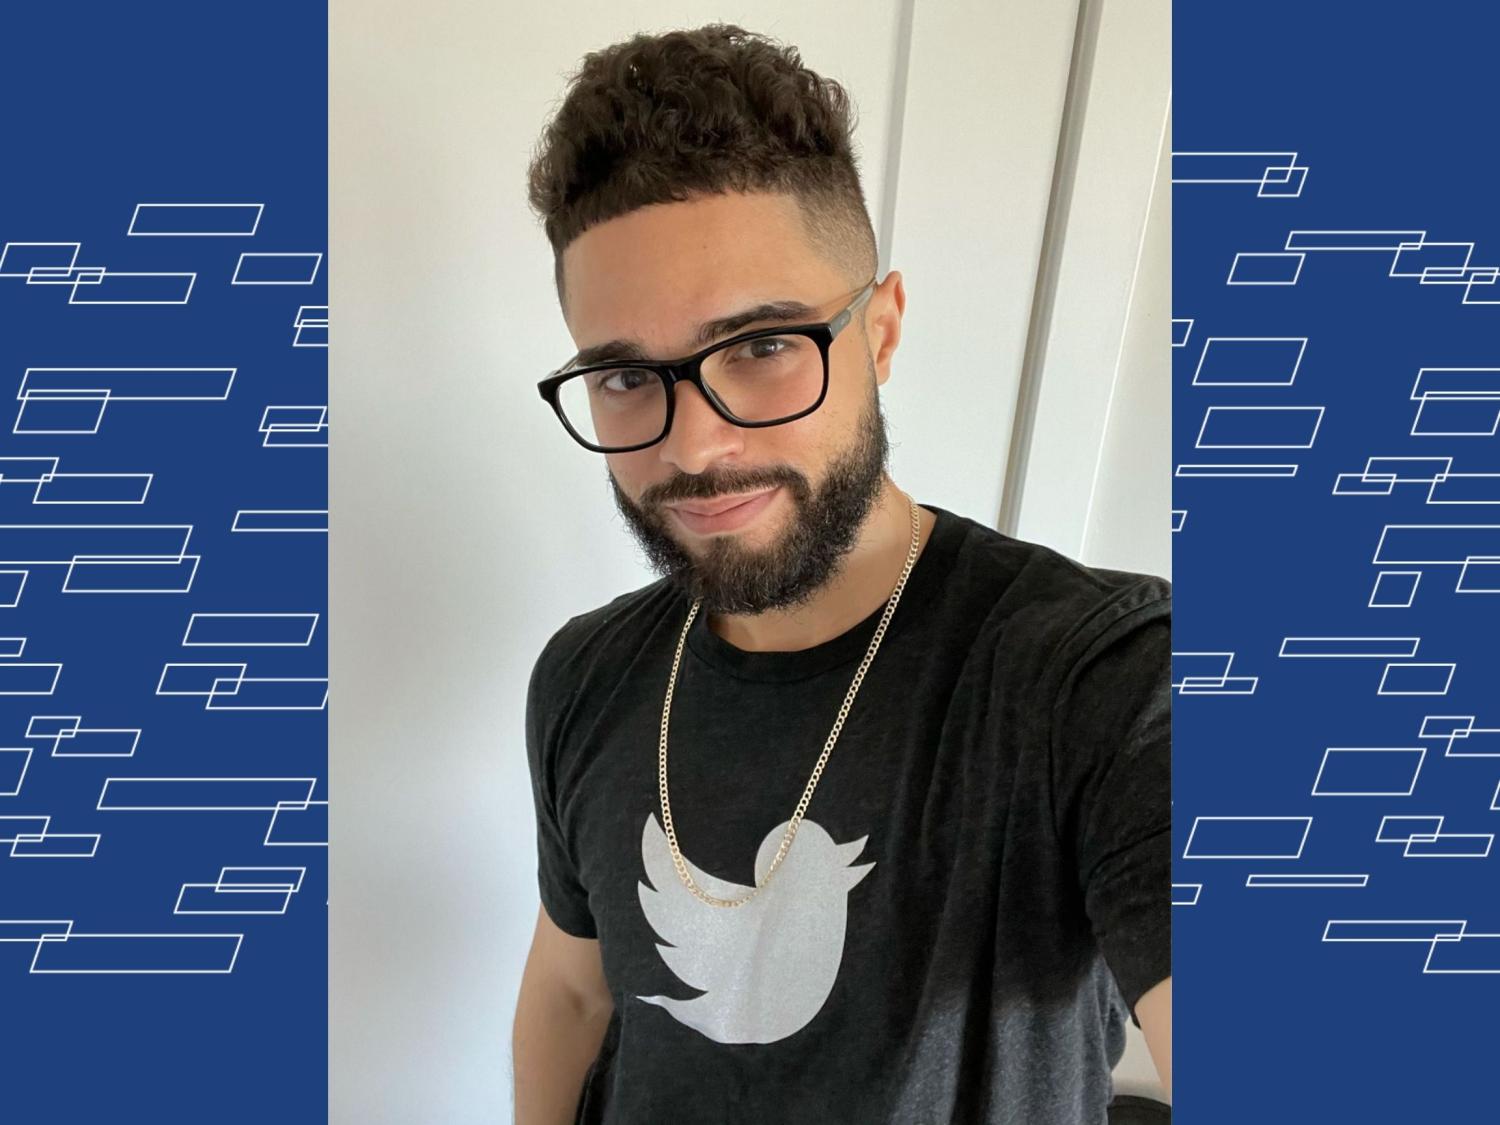 IST alumnus and Latinx workers in tech advocate lands dream job at Twitter